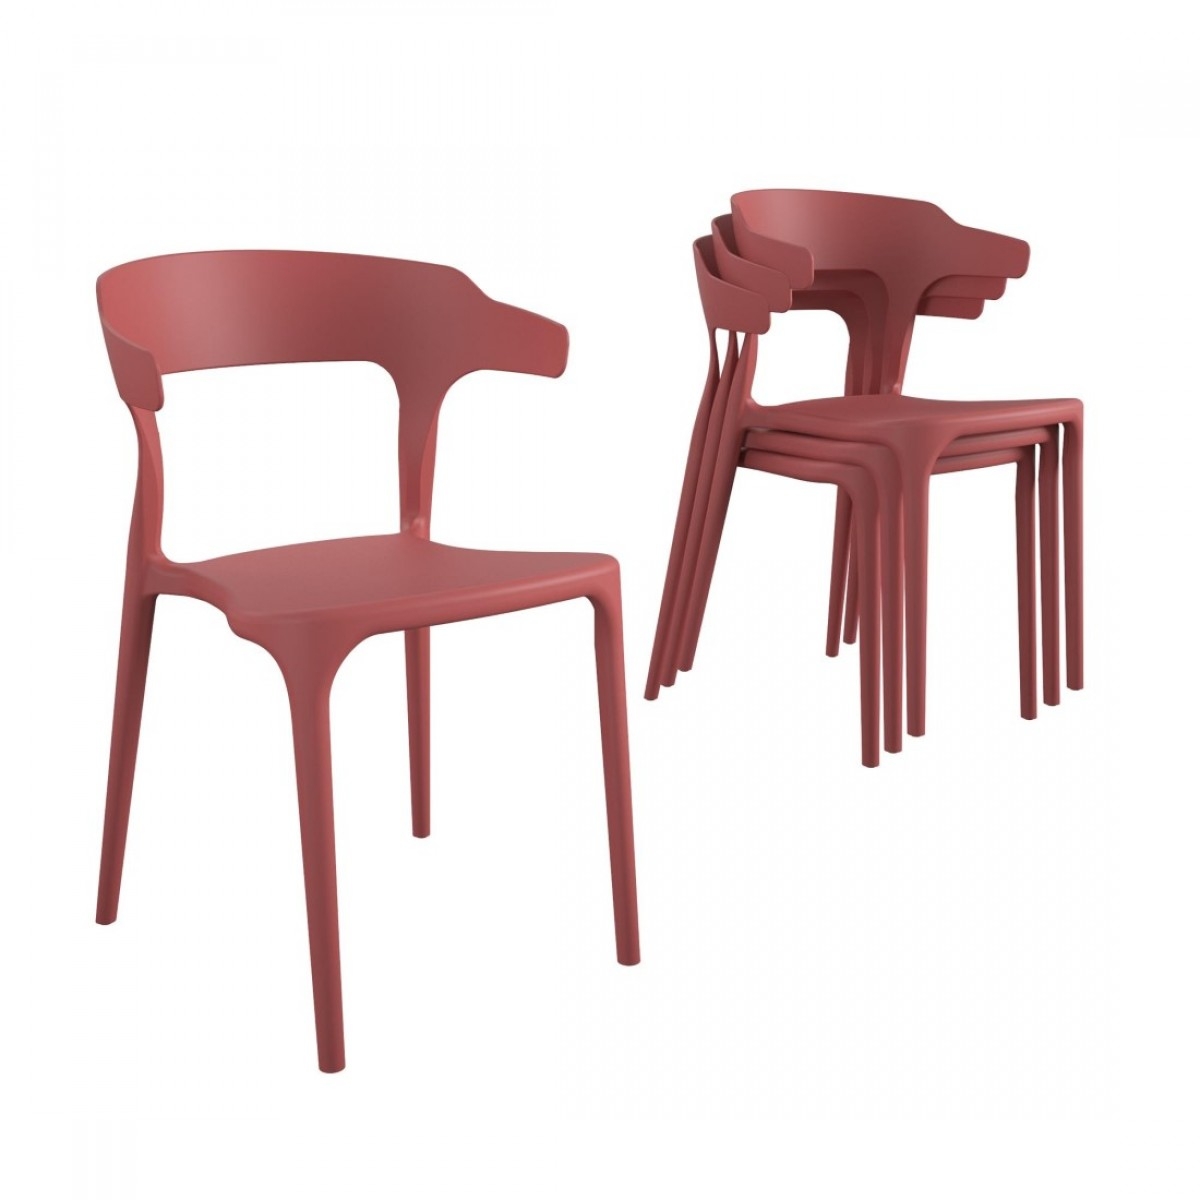 Novogratz Felix Stacking Dining Chairs Set Of 4 In Red